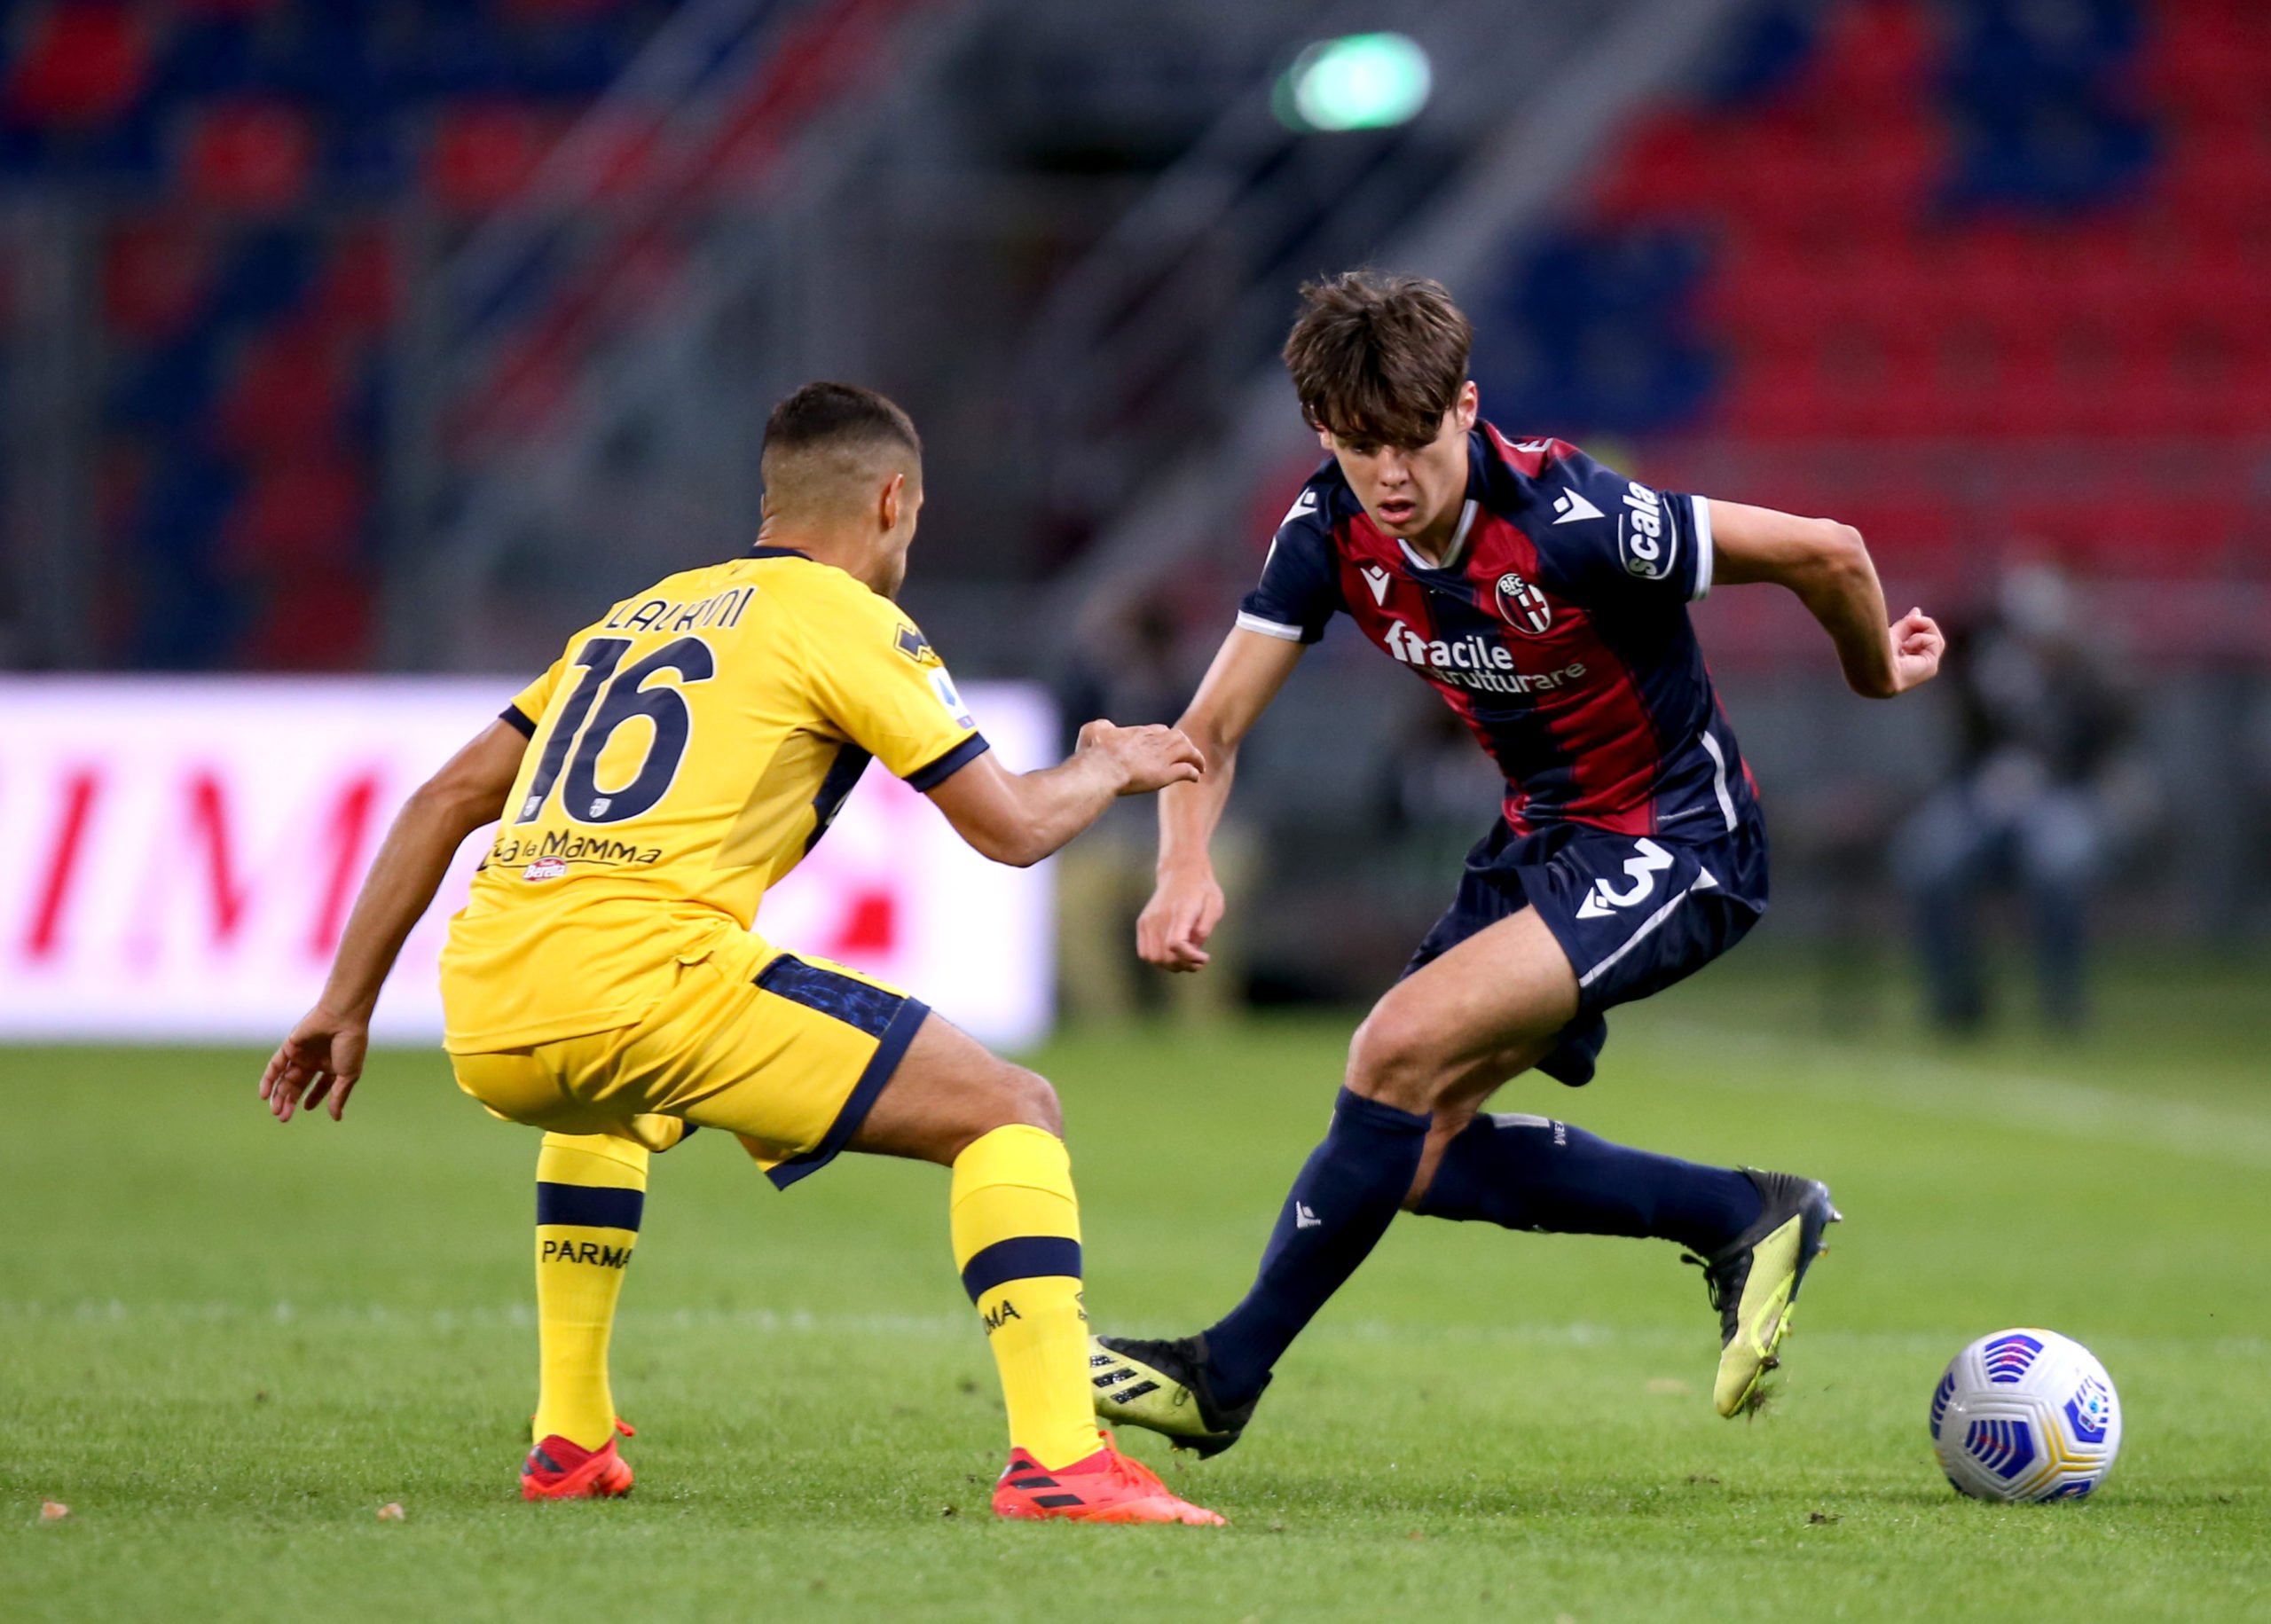 Italian Report: Celtic target Aaron Hickey subject of intensified talks between Bologna and Fiorentina